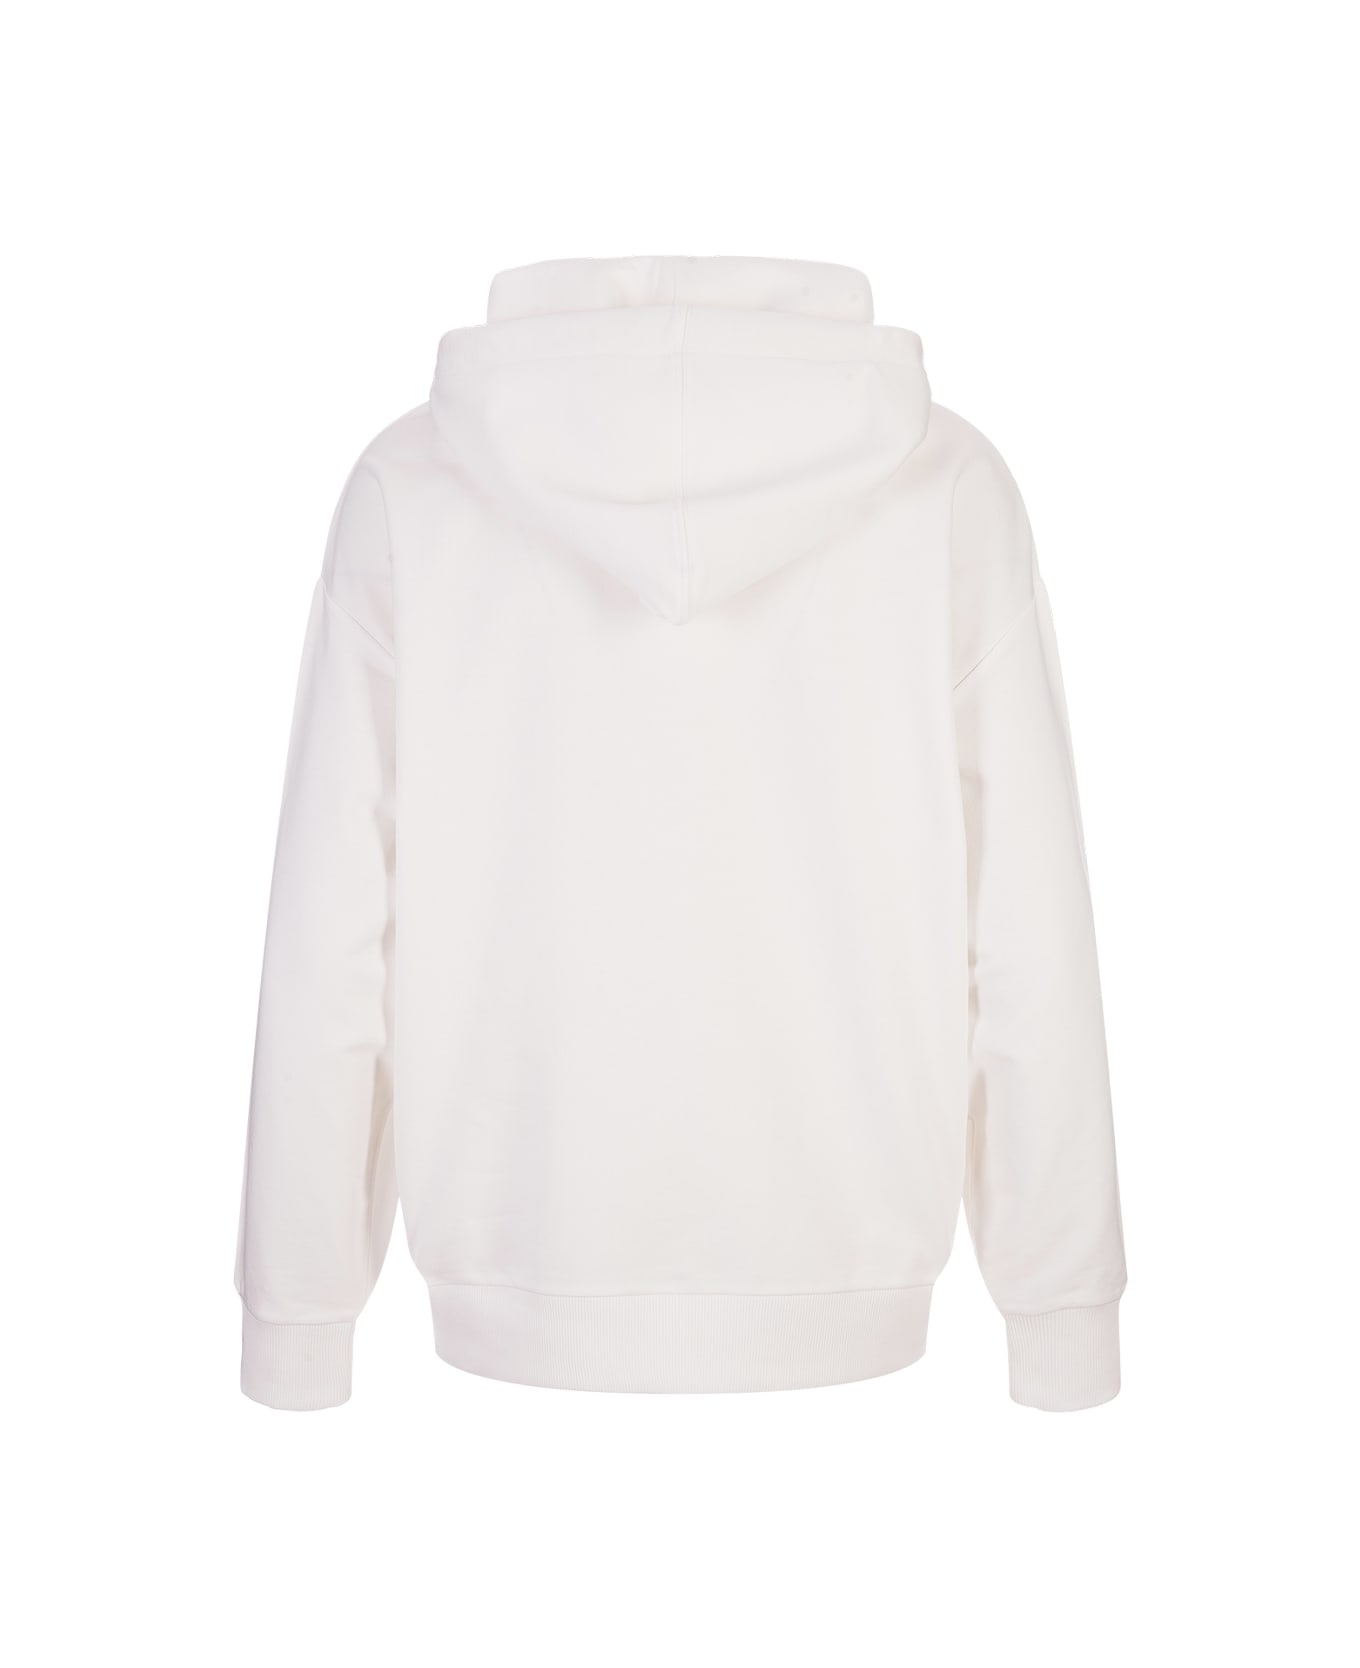 White Hoodie With Embroidered Lettering Logo - 2